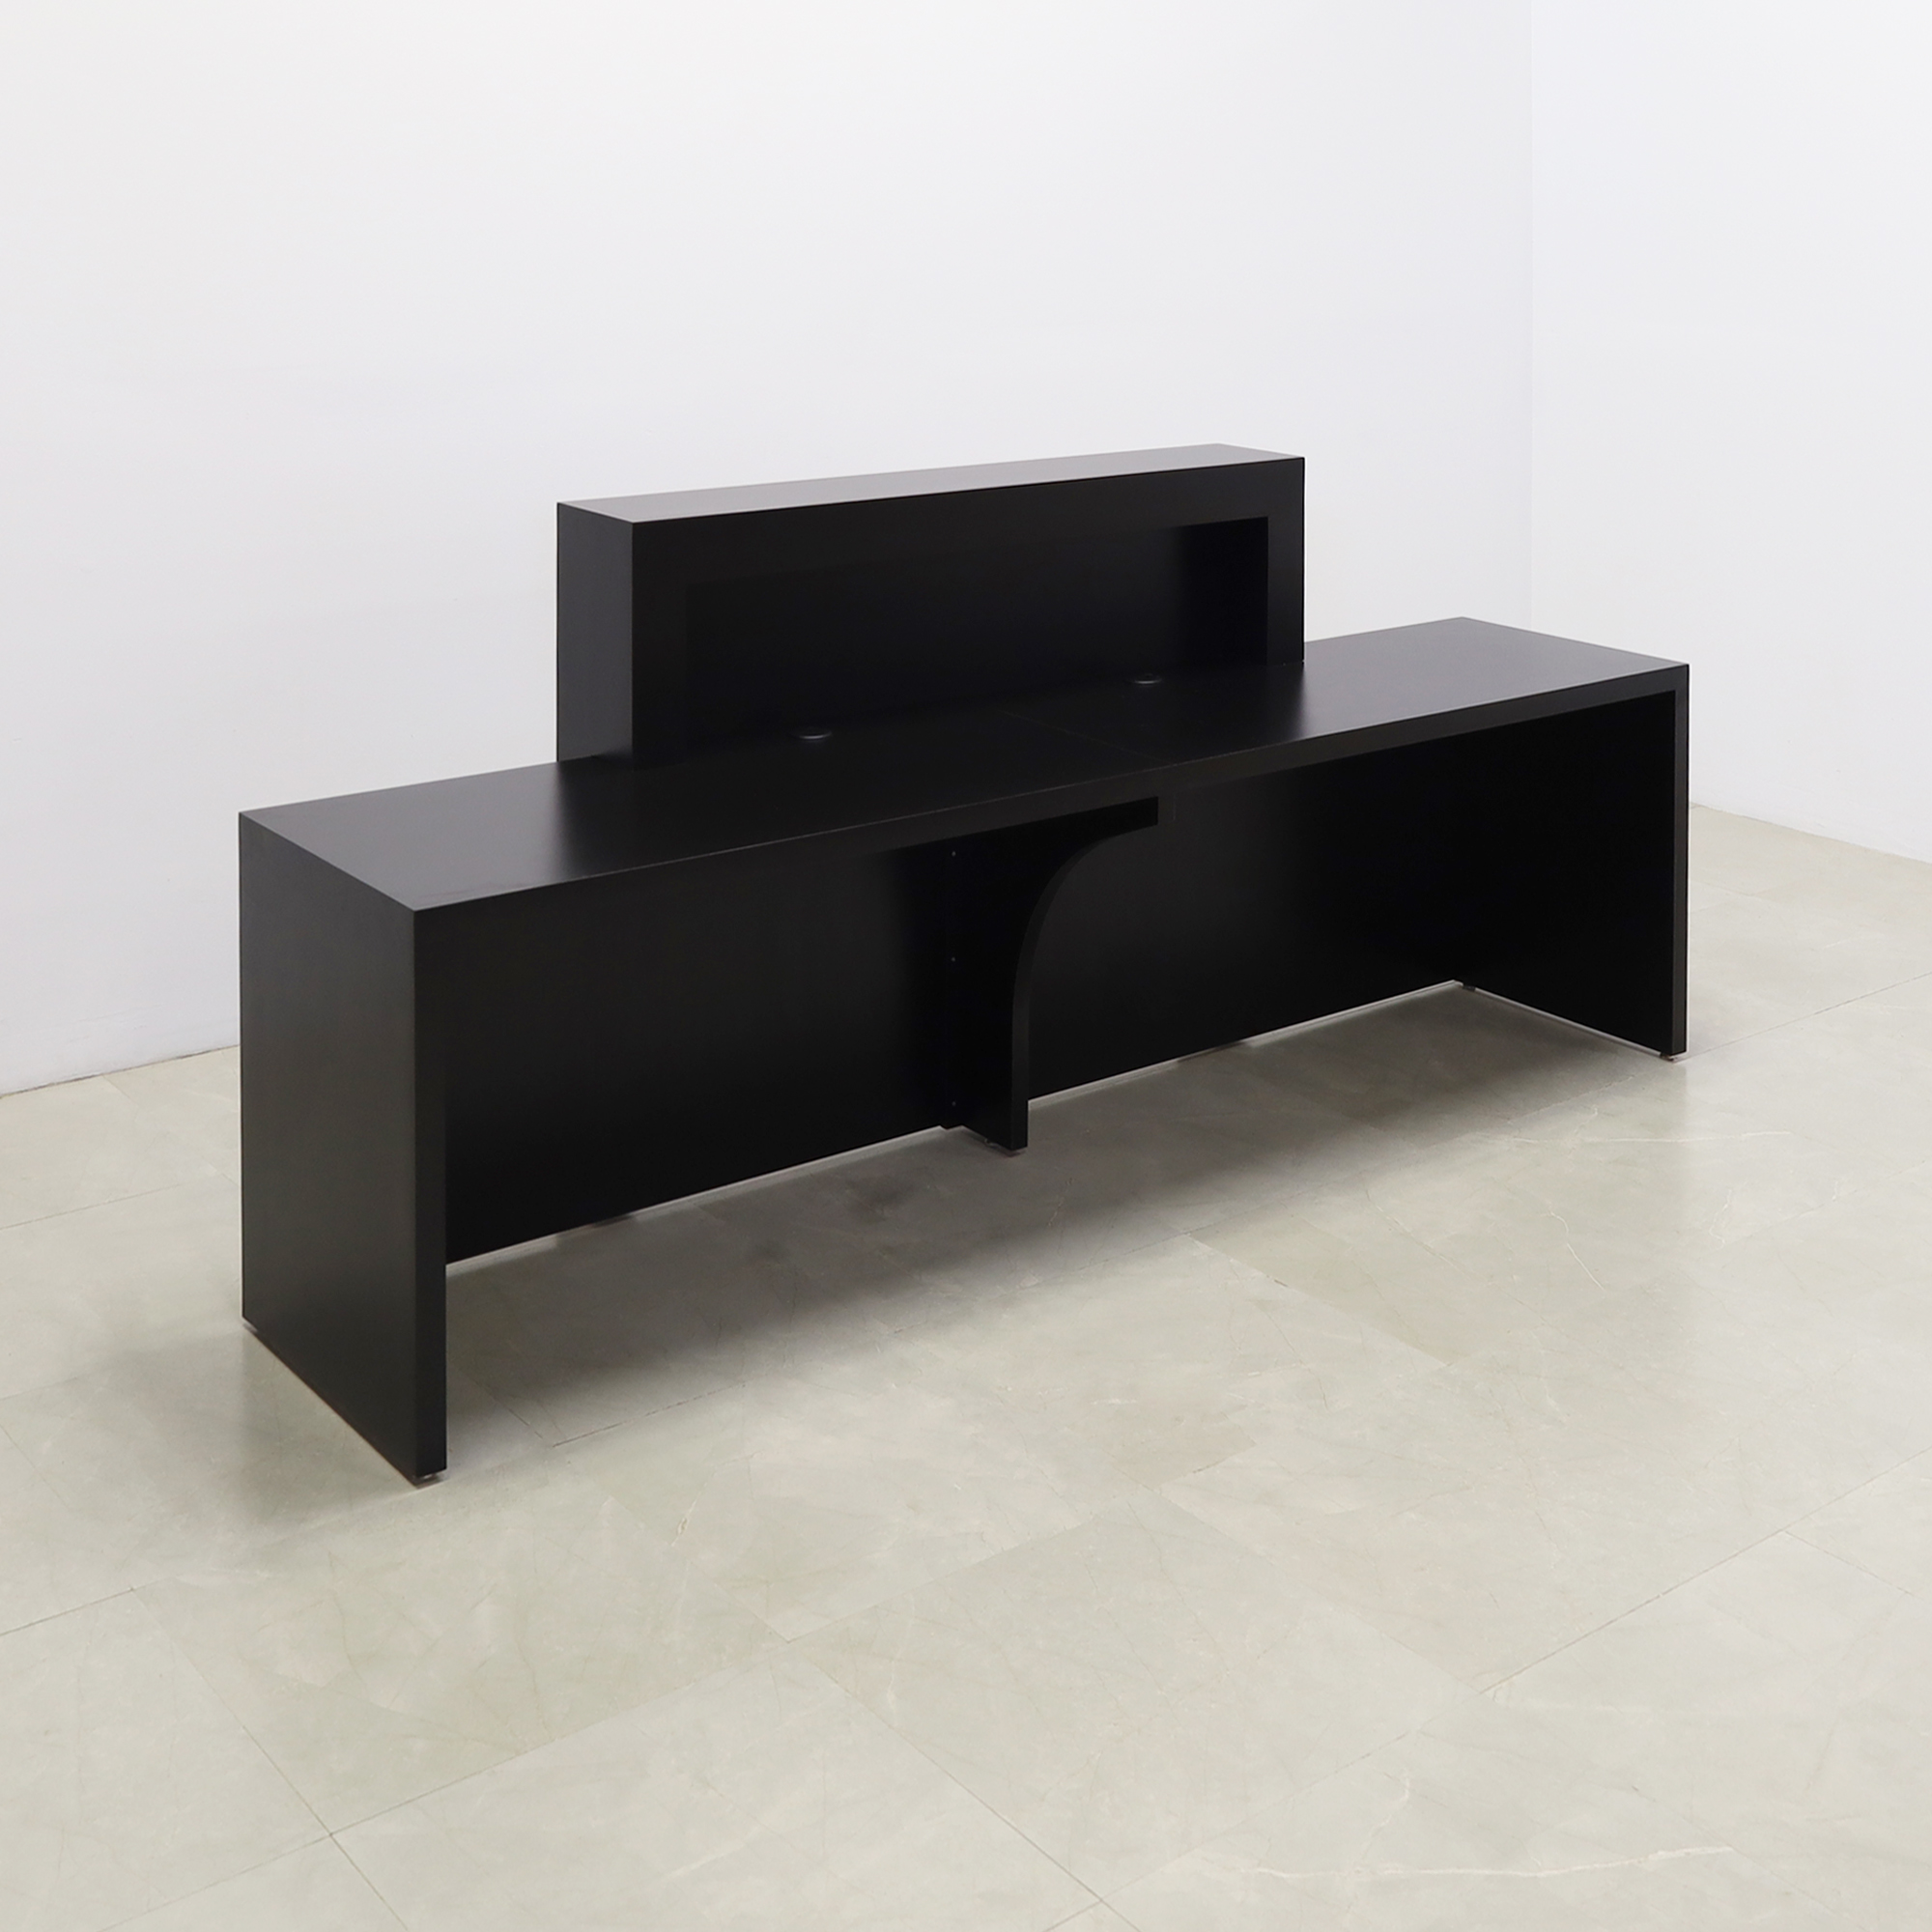 120 inches New York Extra Wide reception desk in black matte laminate finish desk, counter and front panel, with colored-LED, seating side view shown here.